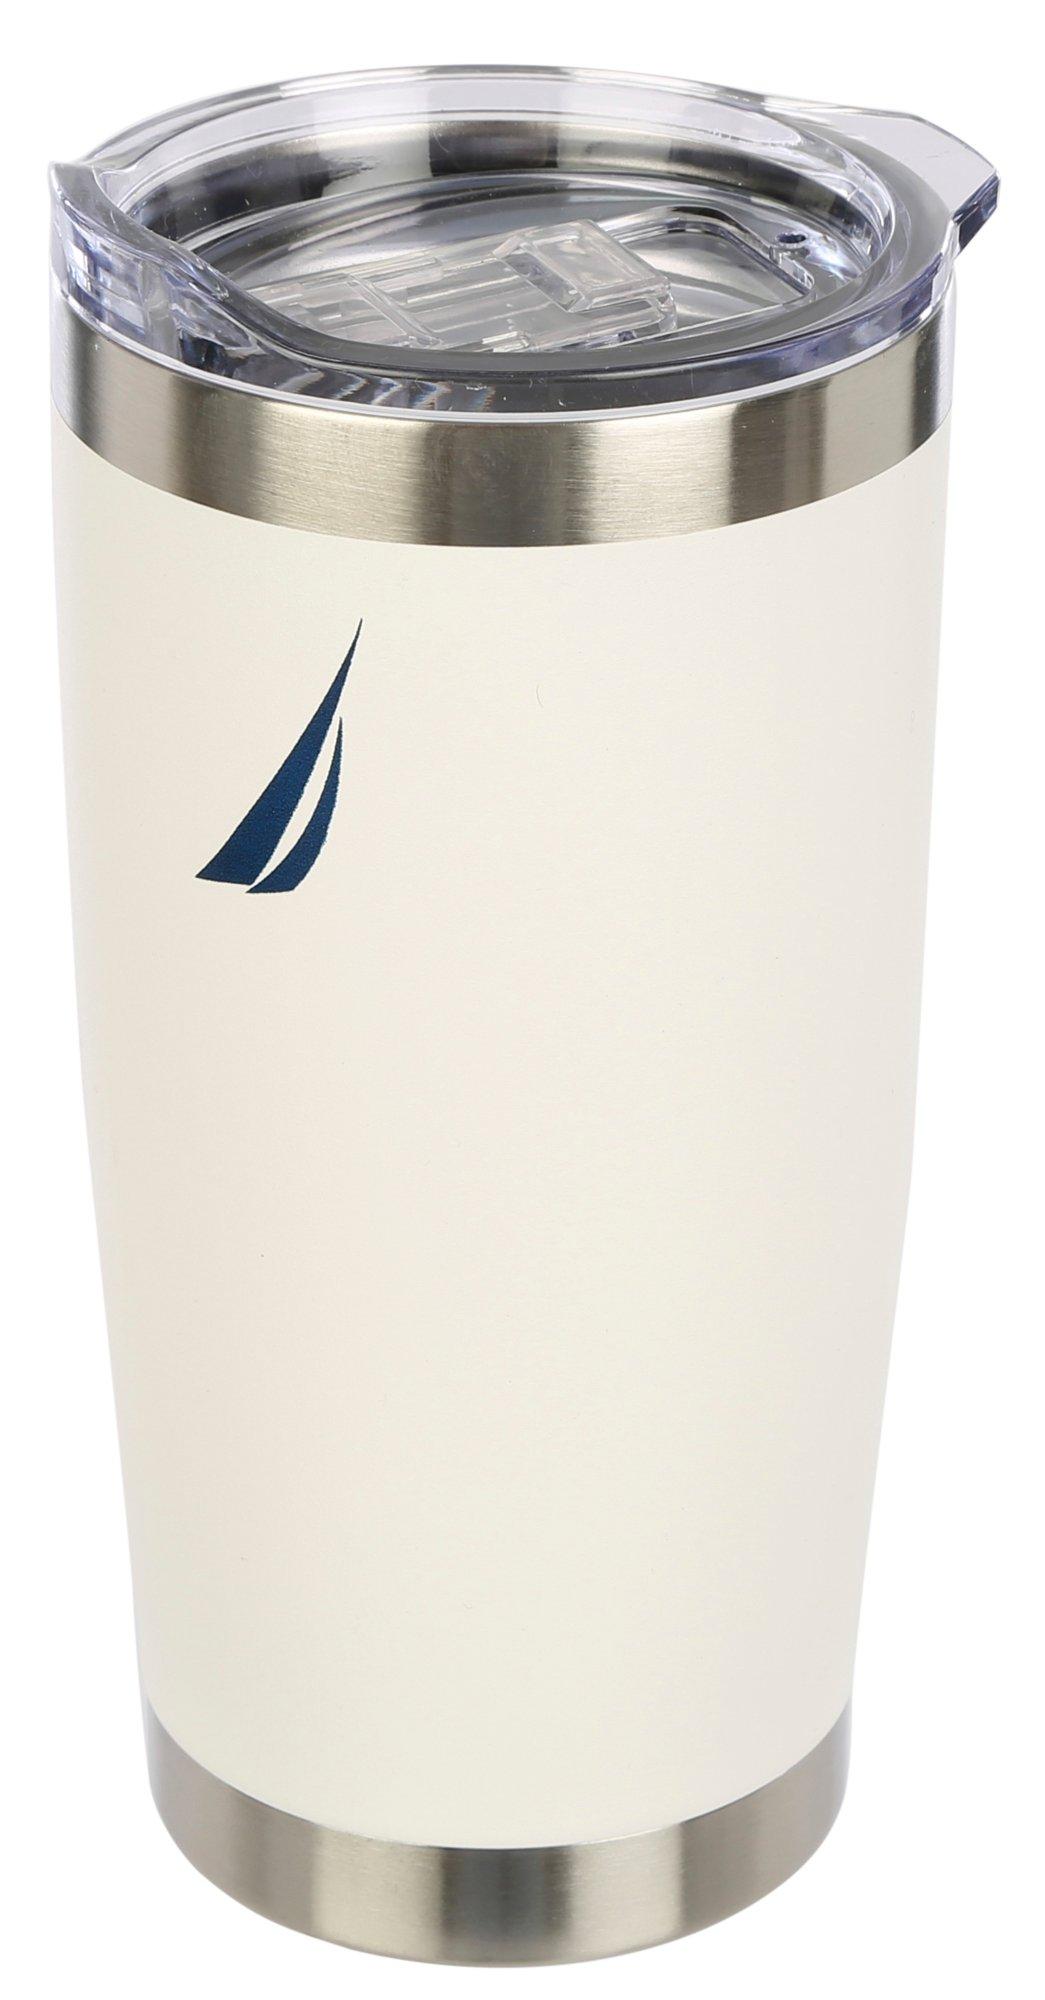 Boost - 32 oz. Steel Shaker with Storage Compartment